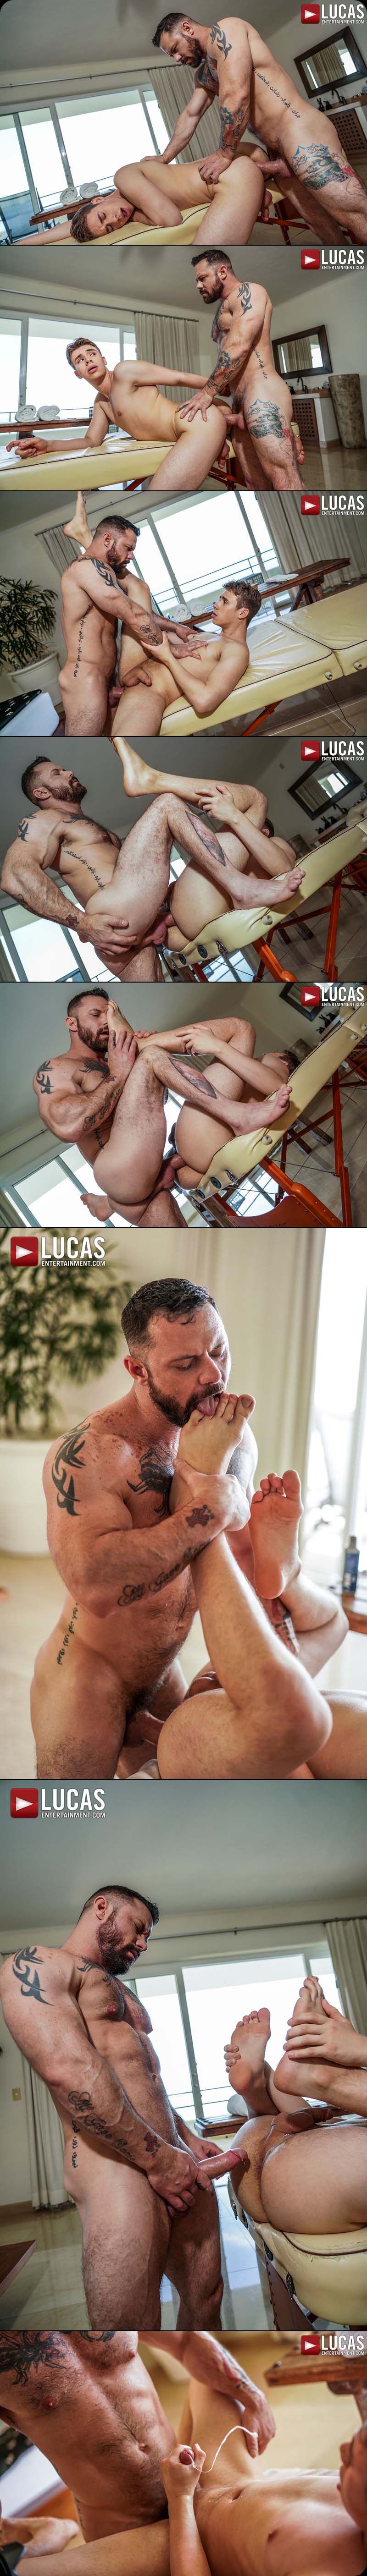 Begging For Raw Cock, Scene One (Sergeant Miles Enjoys An Erotic Massage From Adam Awbride) at LucasEntertainment